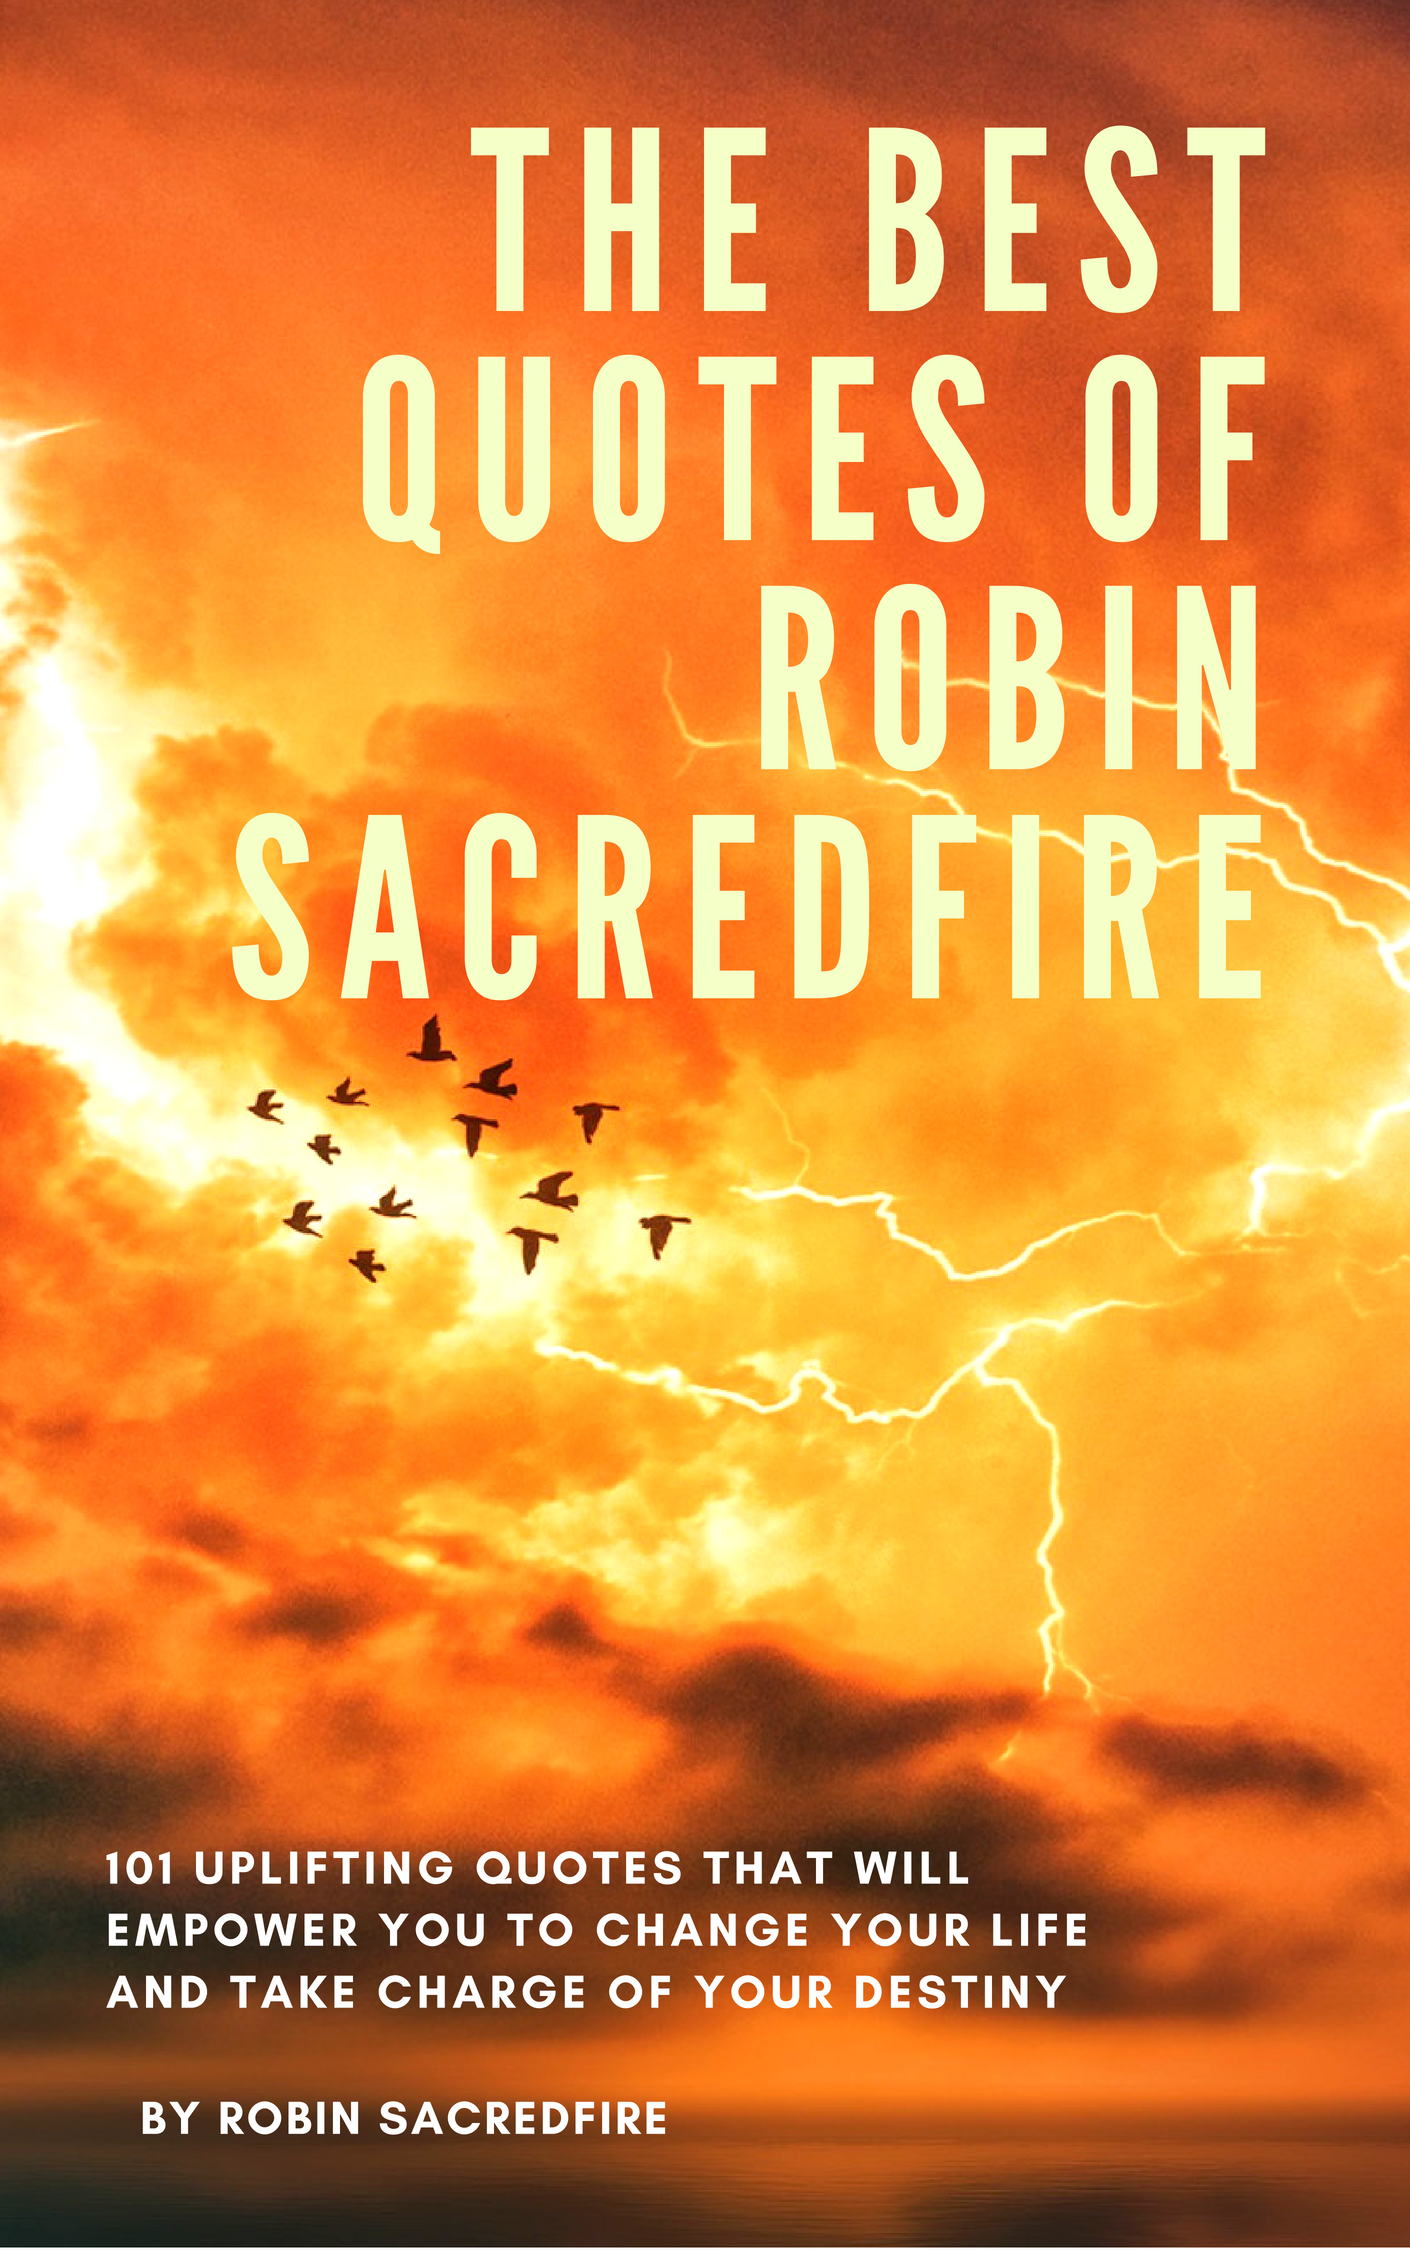 FREE: The Best Quotes of Robin Sacredfire: 101 Uplifting Quotes That Will Empower You to Change Your Life and Take Charge of Your Destiny by Robin Sacredfire